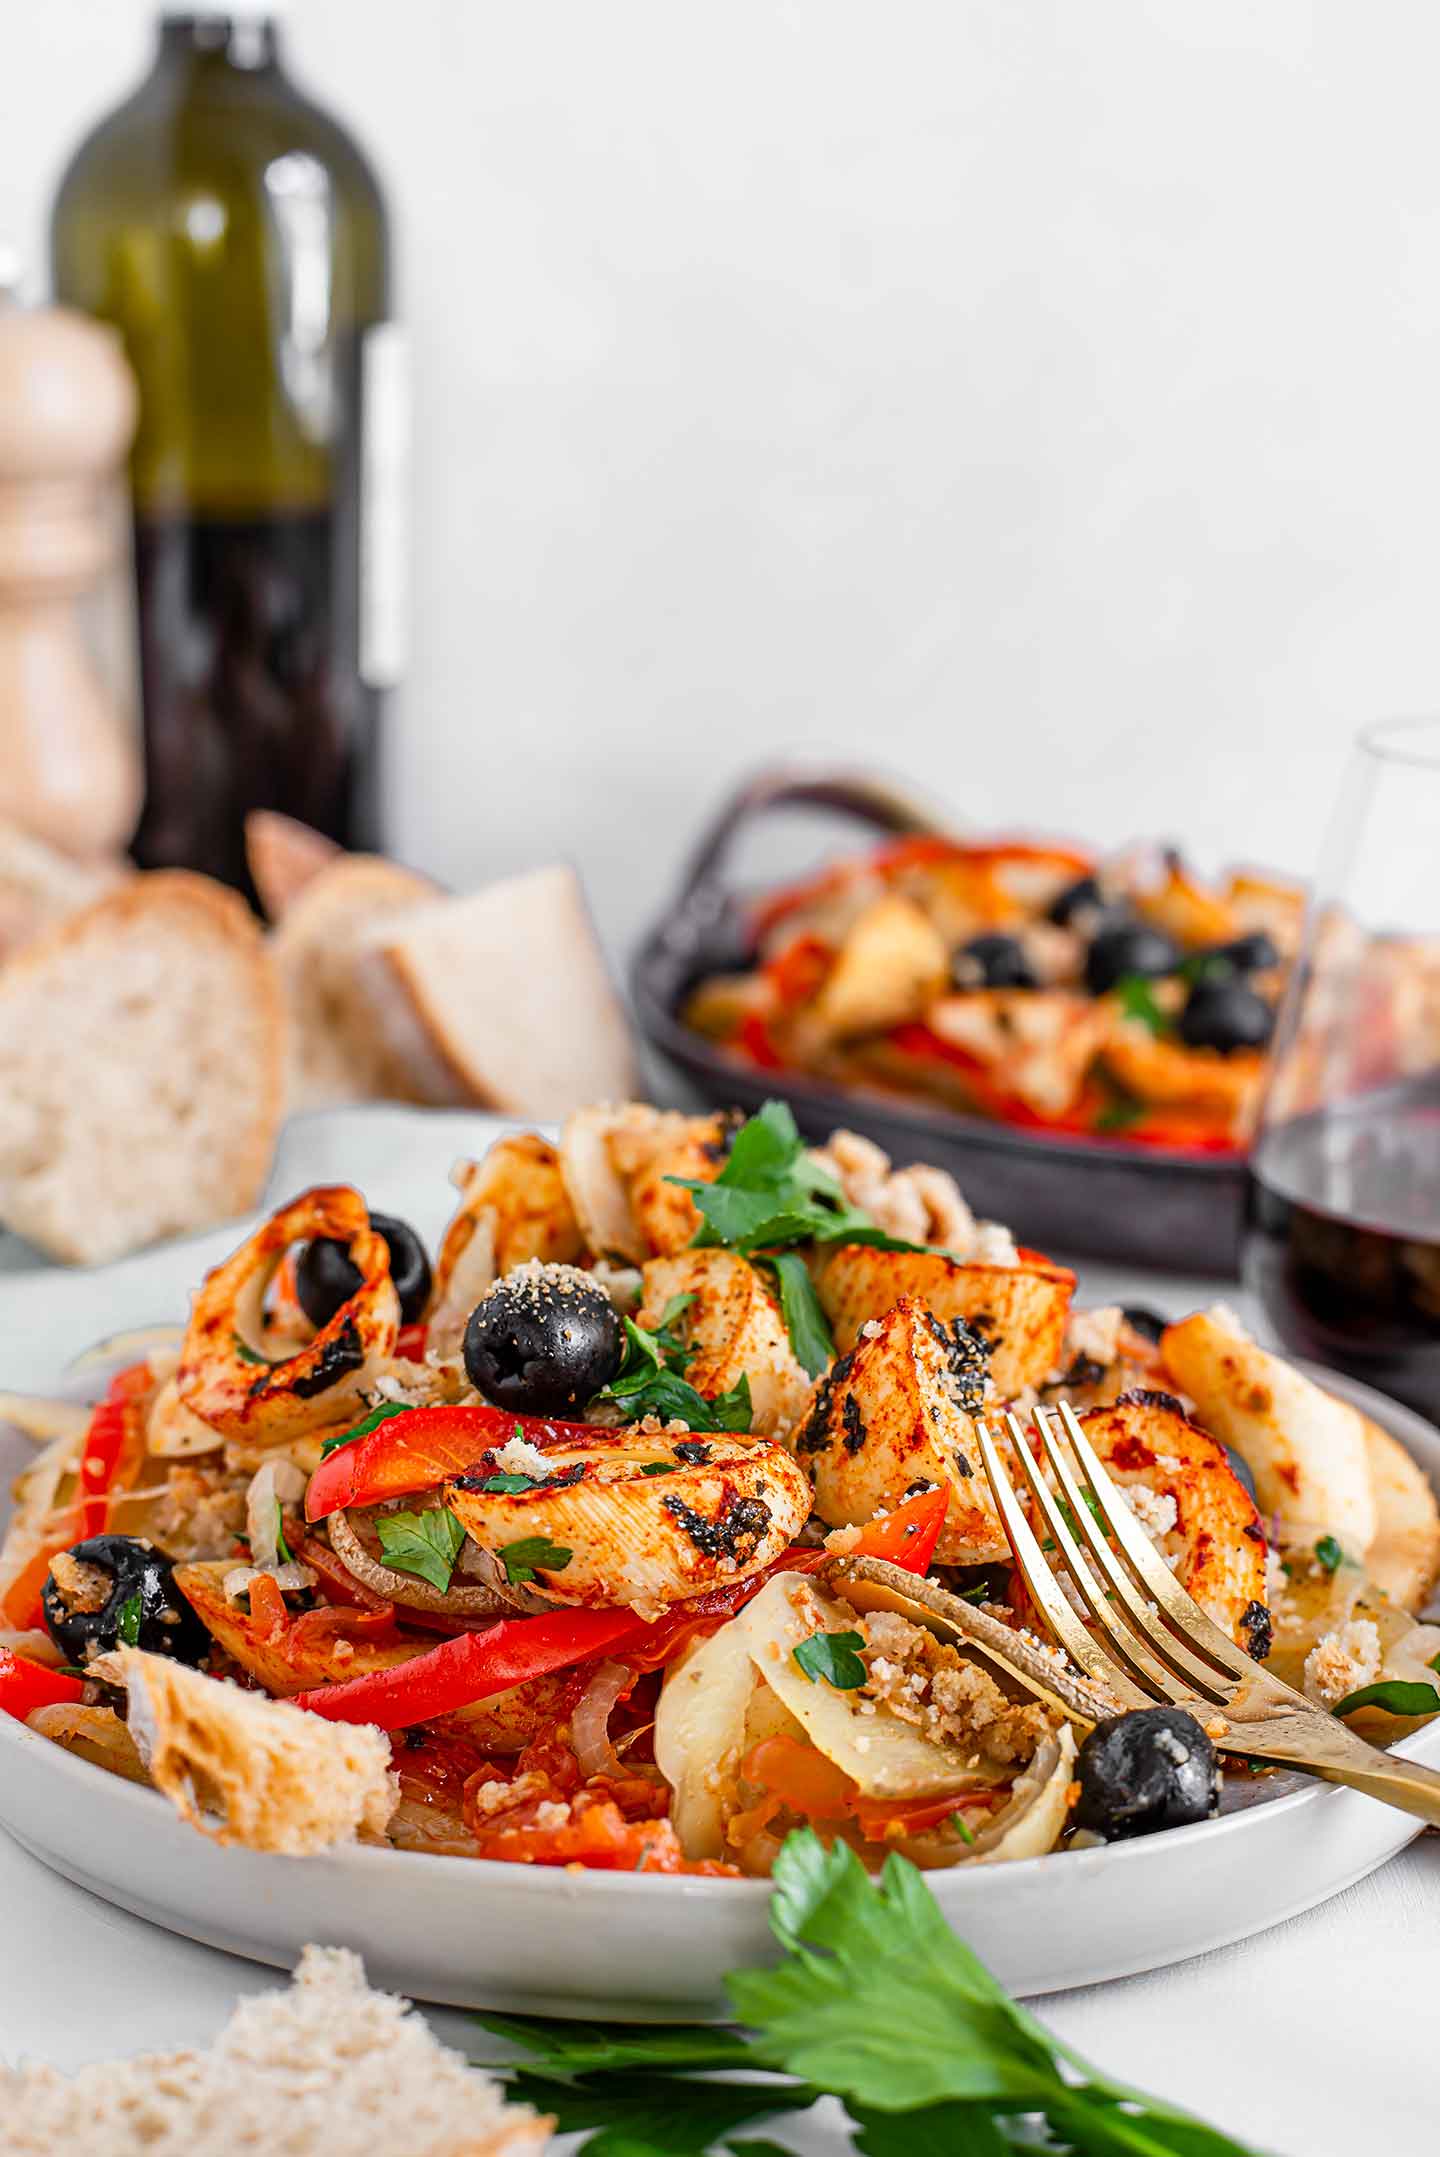 Side view of vegan Portuguese bacalhau on a plate with a fork resting on the side. Another plate of stew, a glass of red wine, a wine bottle, and slices of bread are in the background.